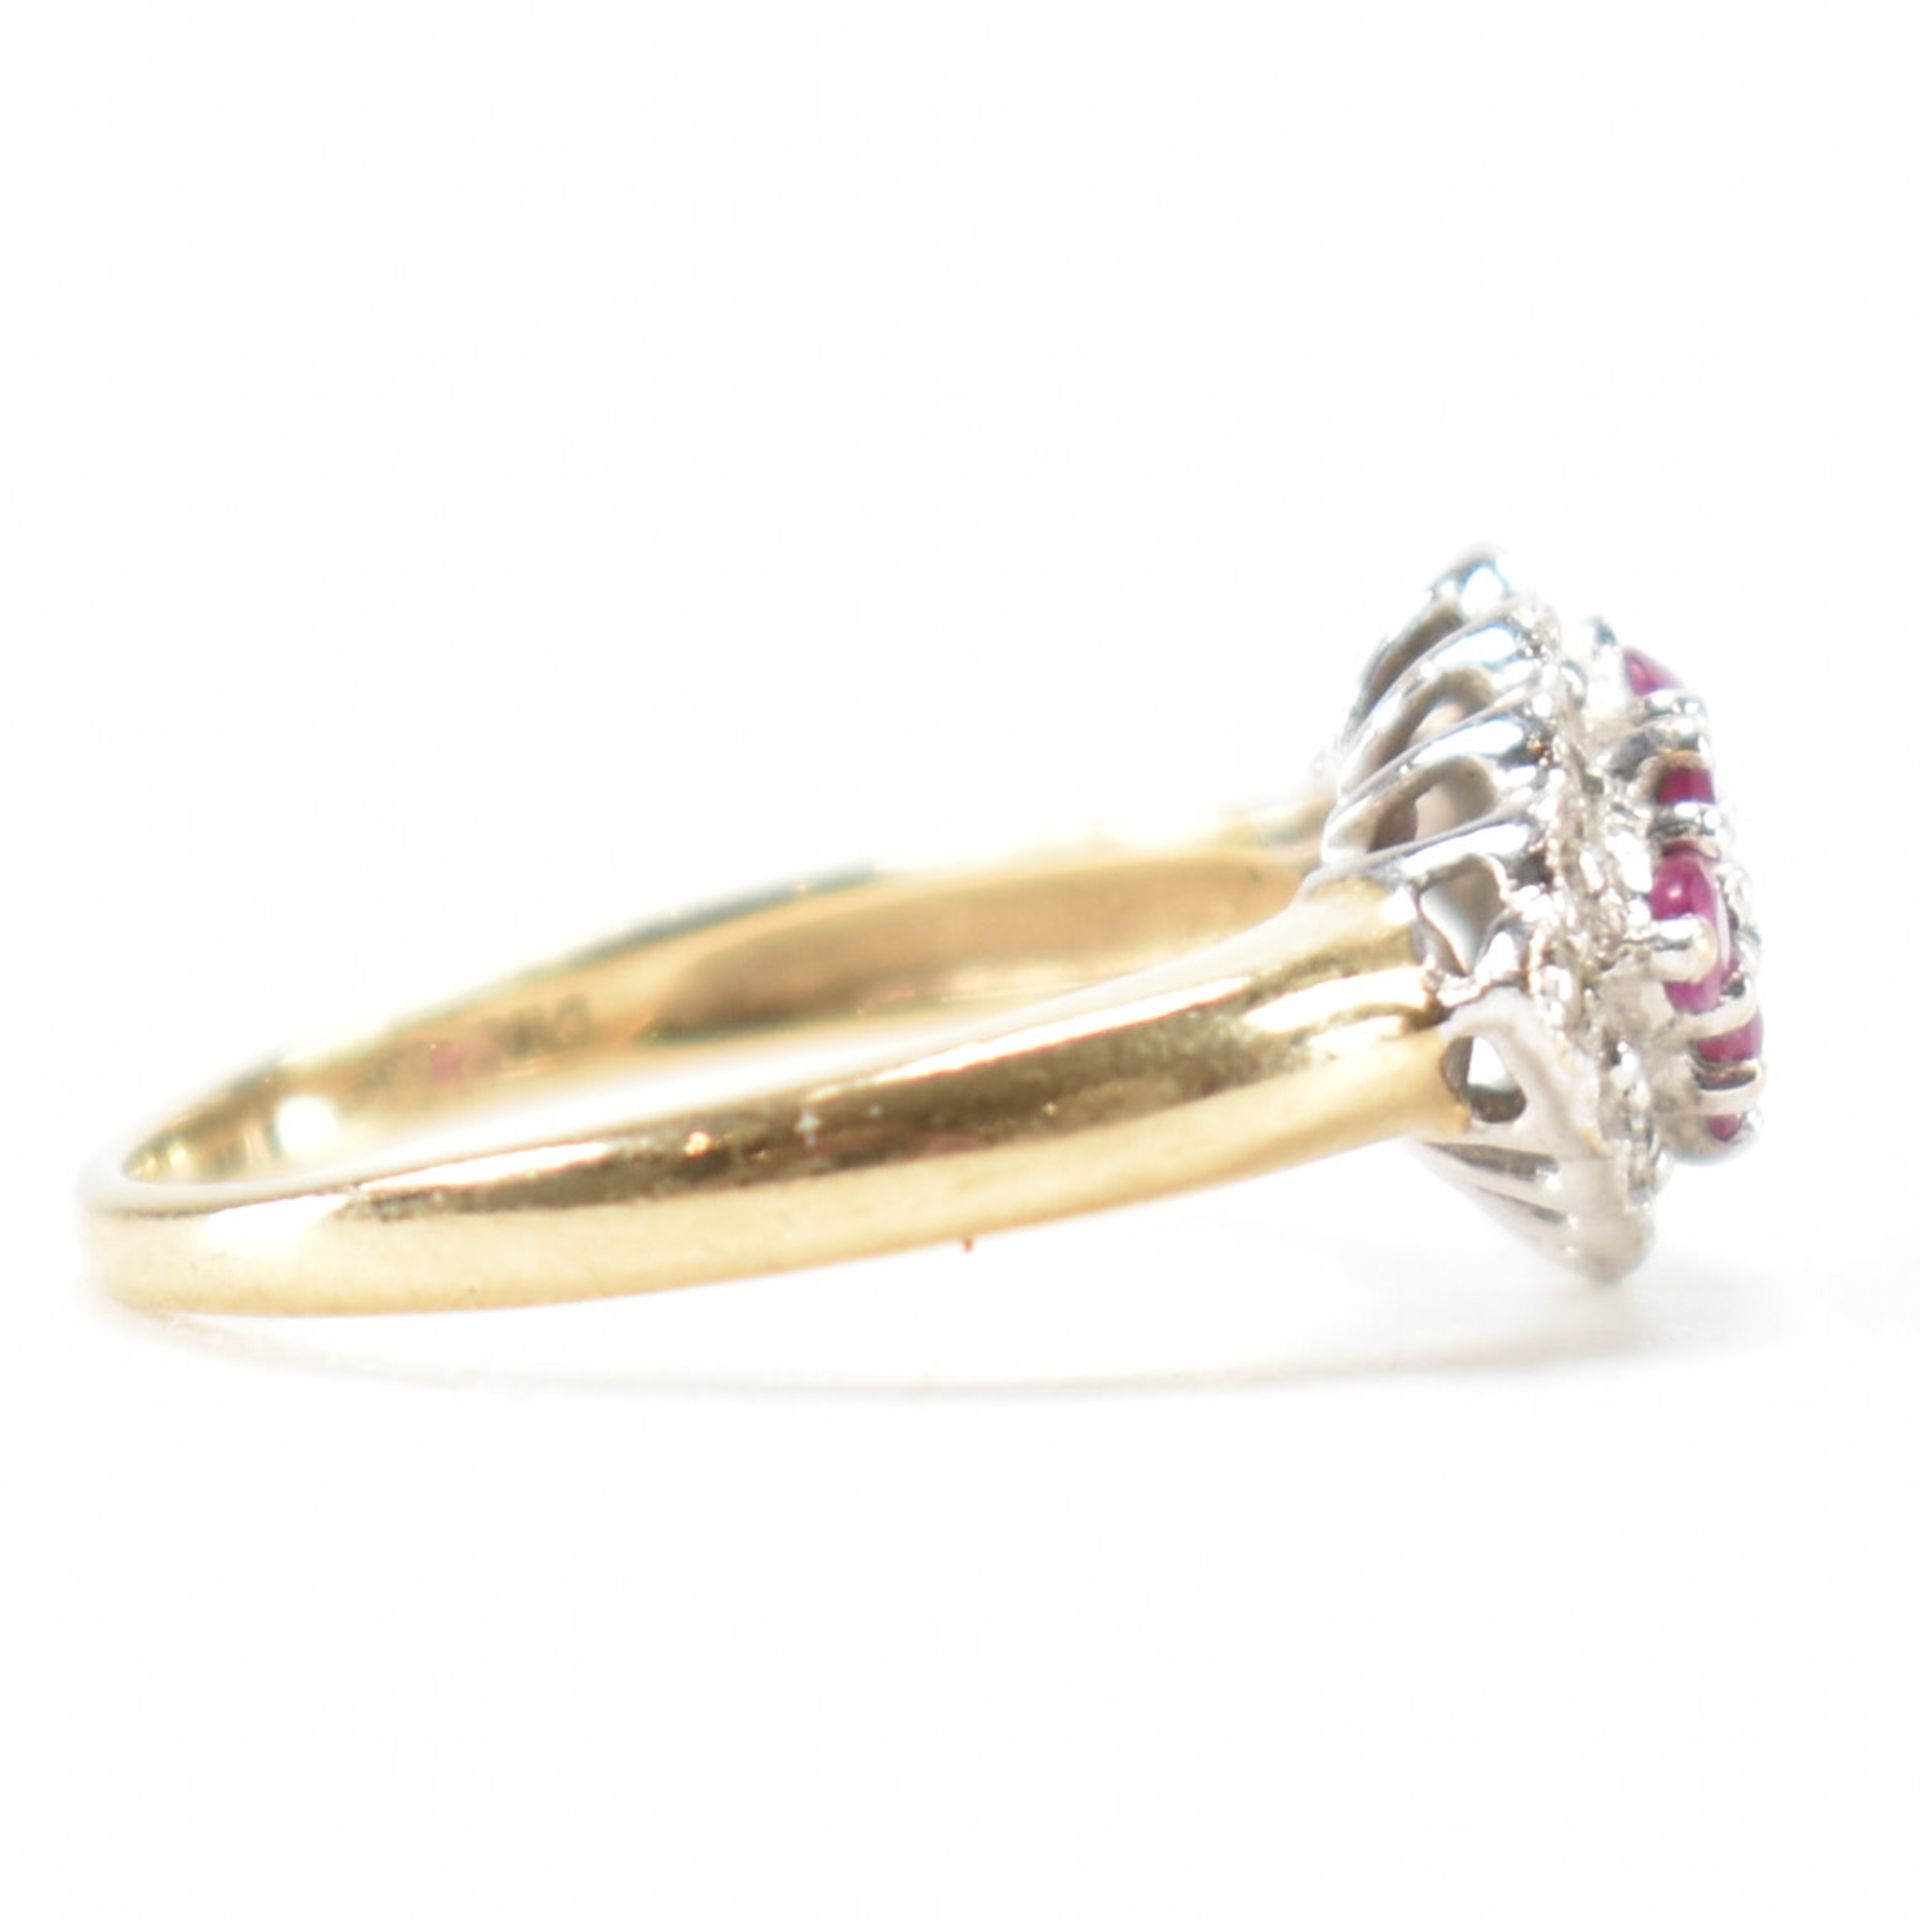 HALLMARKED 9CT GOLD RUBY & DIAMOND CLUSTER RING - Image 5 of 9